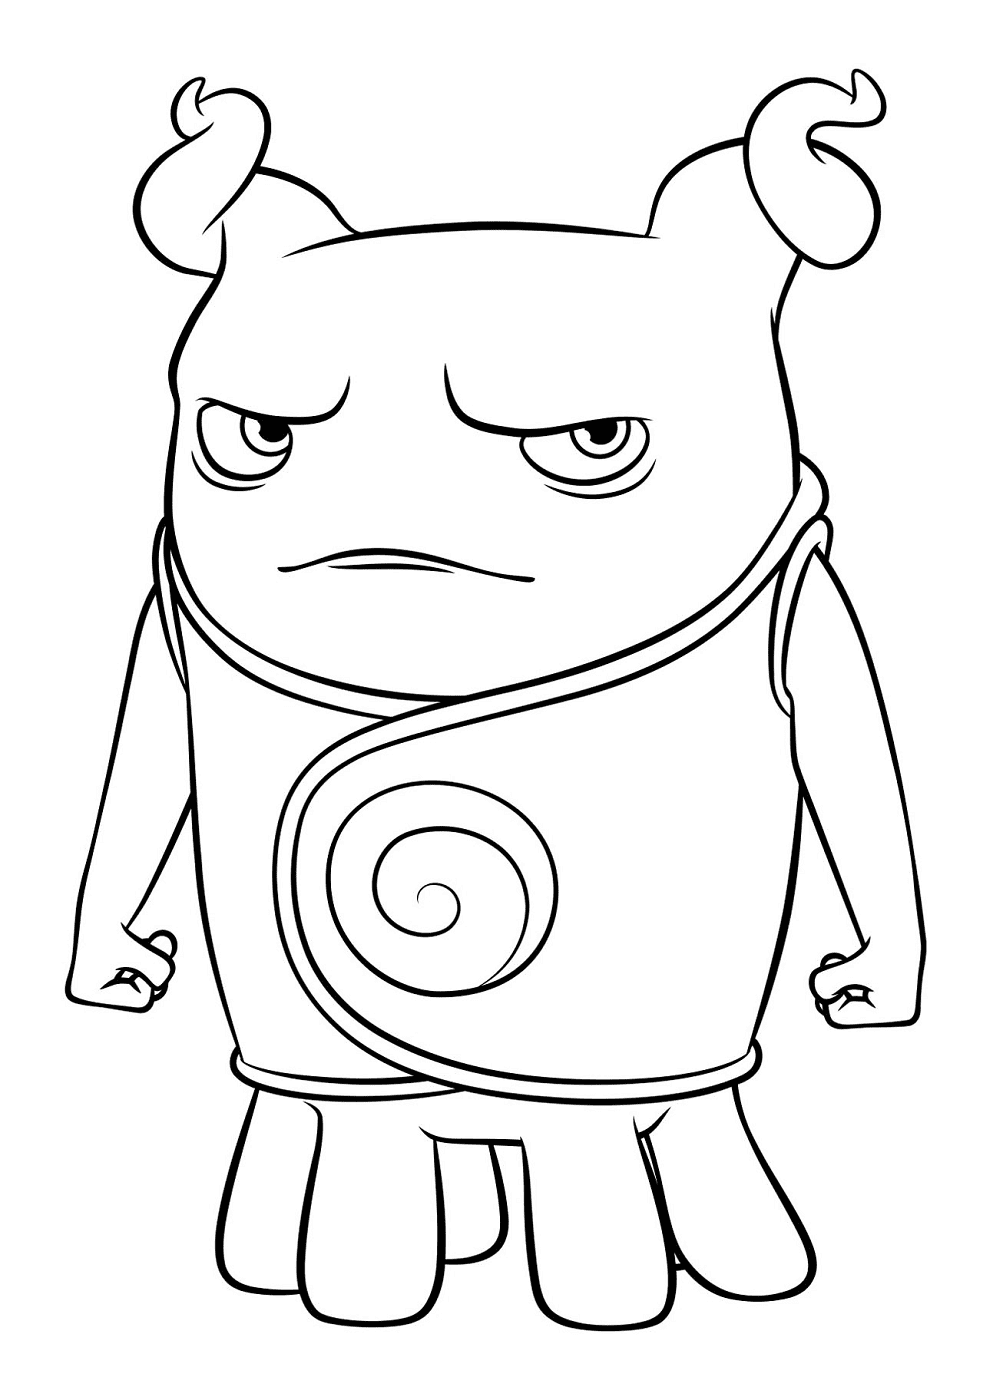 Angry Oh Coloring Page